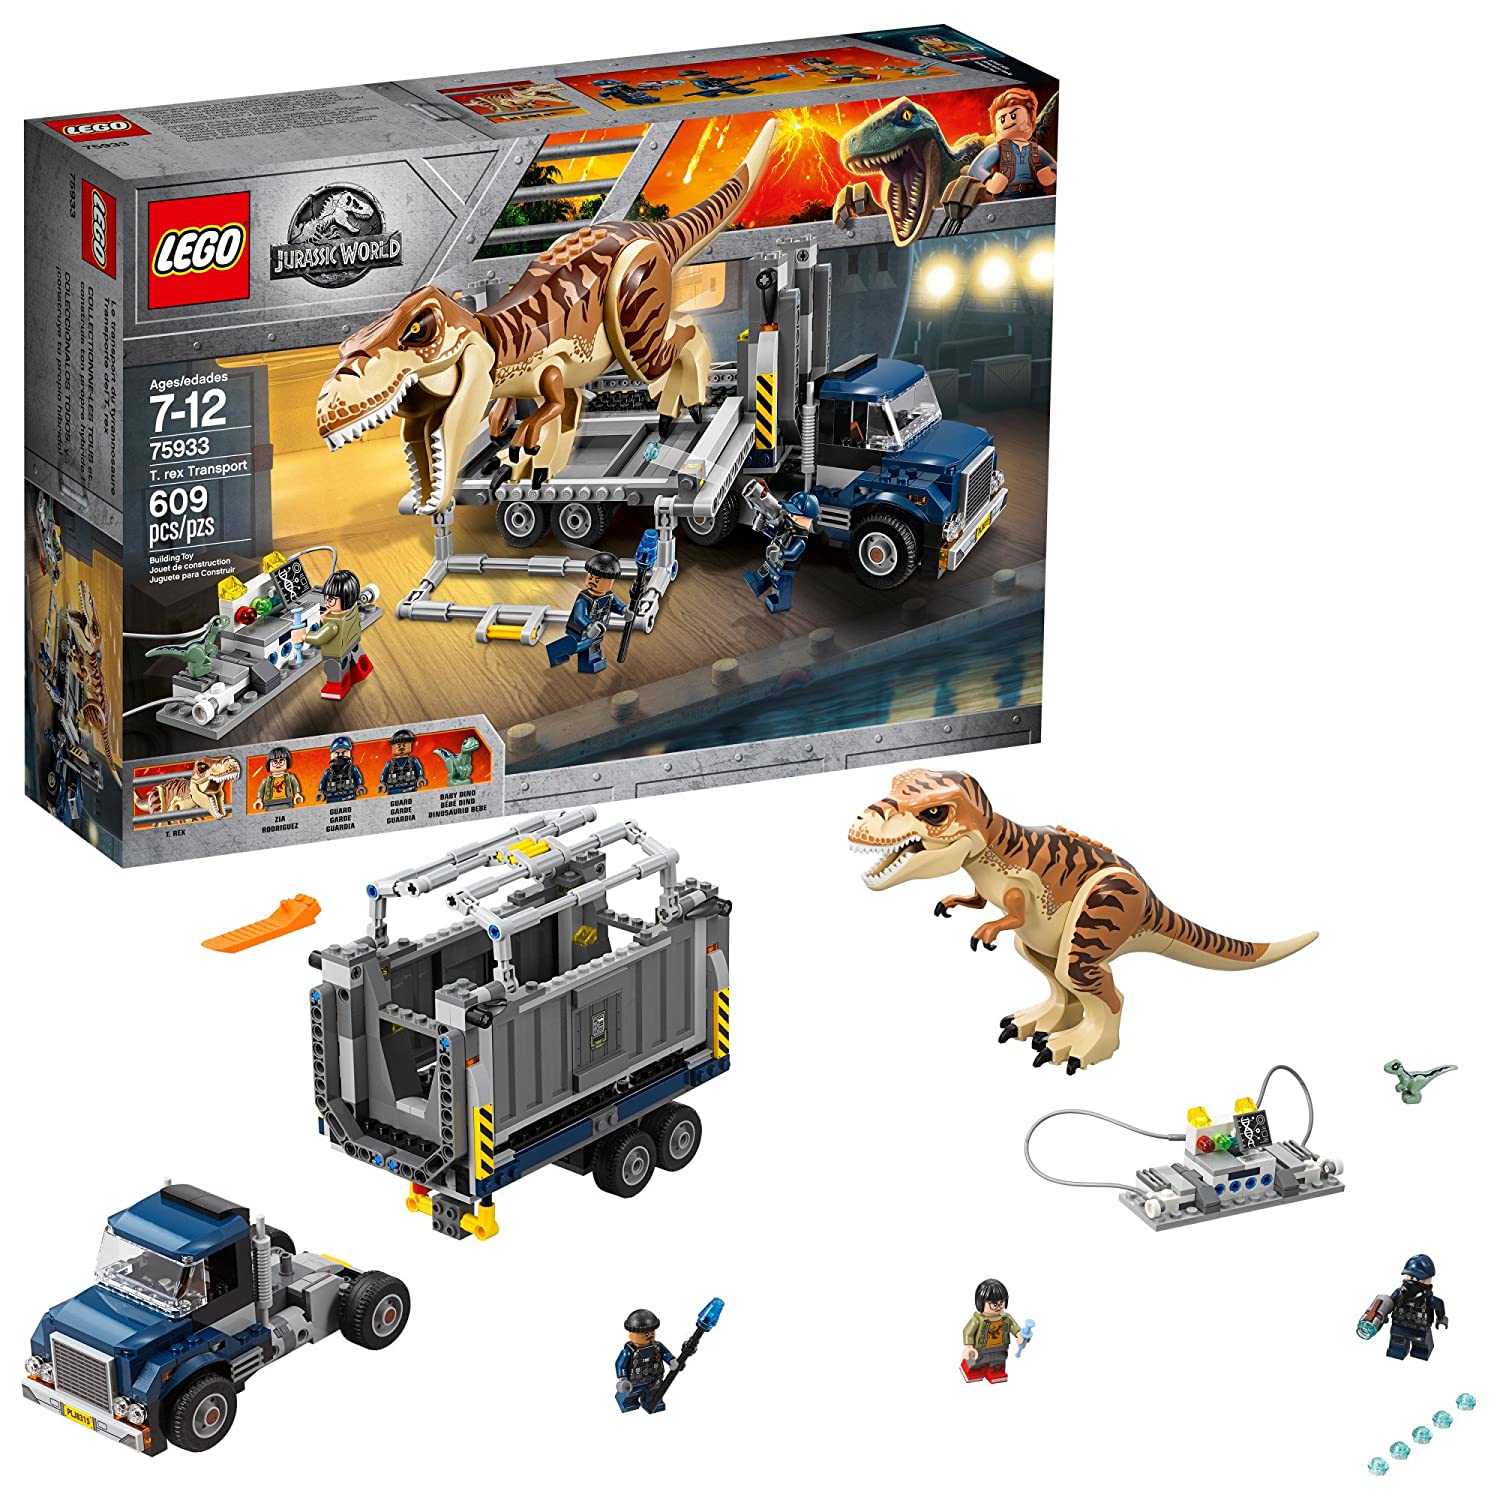 Top 9 Best Lego Jurassic Park Sets Reviews in 2022 1